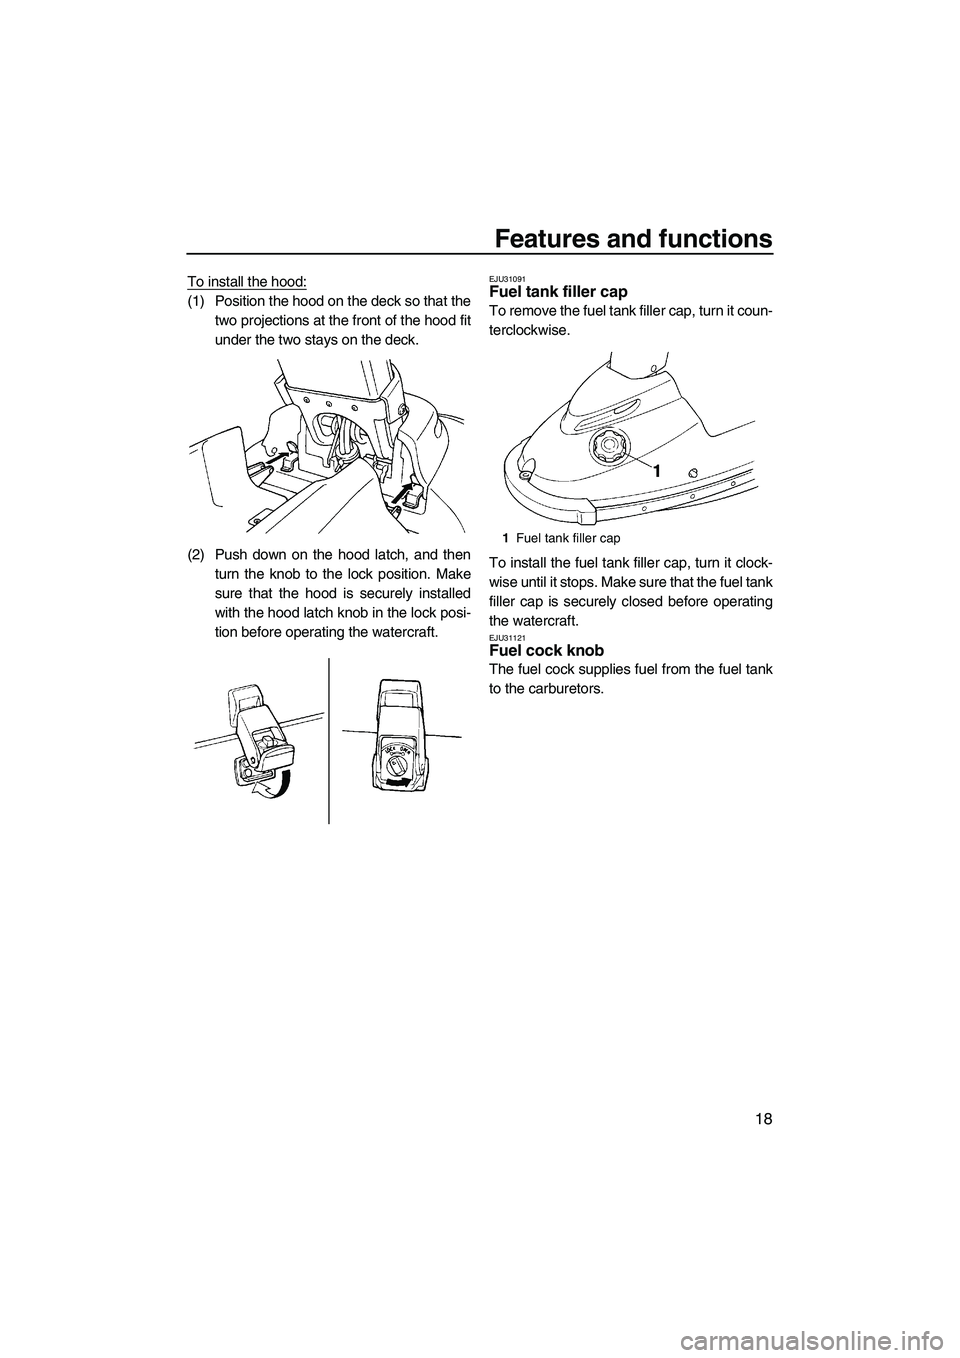 YAMAHA SUPERJET 2009  Owners Manual Features and functions
18
To install the hood:
(1) Position the hood on the deck so that the
two projections at the front of the hood fit
under the two stays on the deck.
(2) Push down on the hood lat